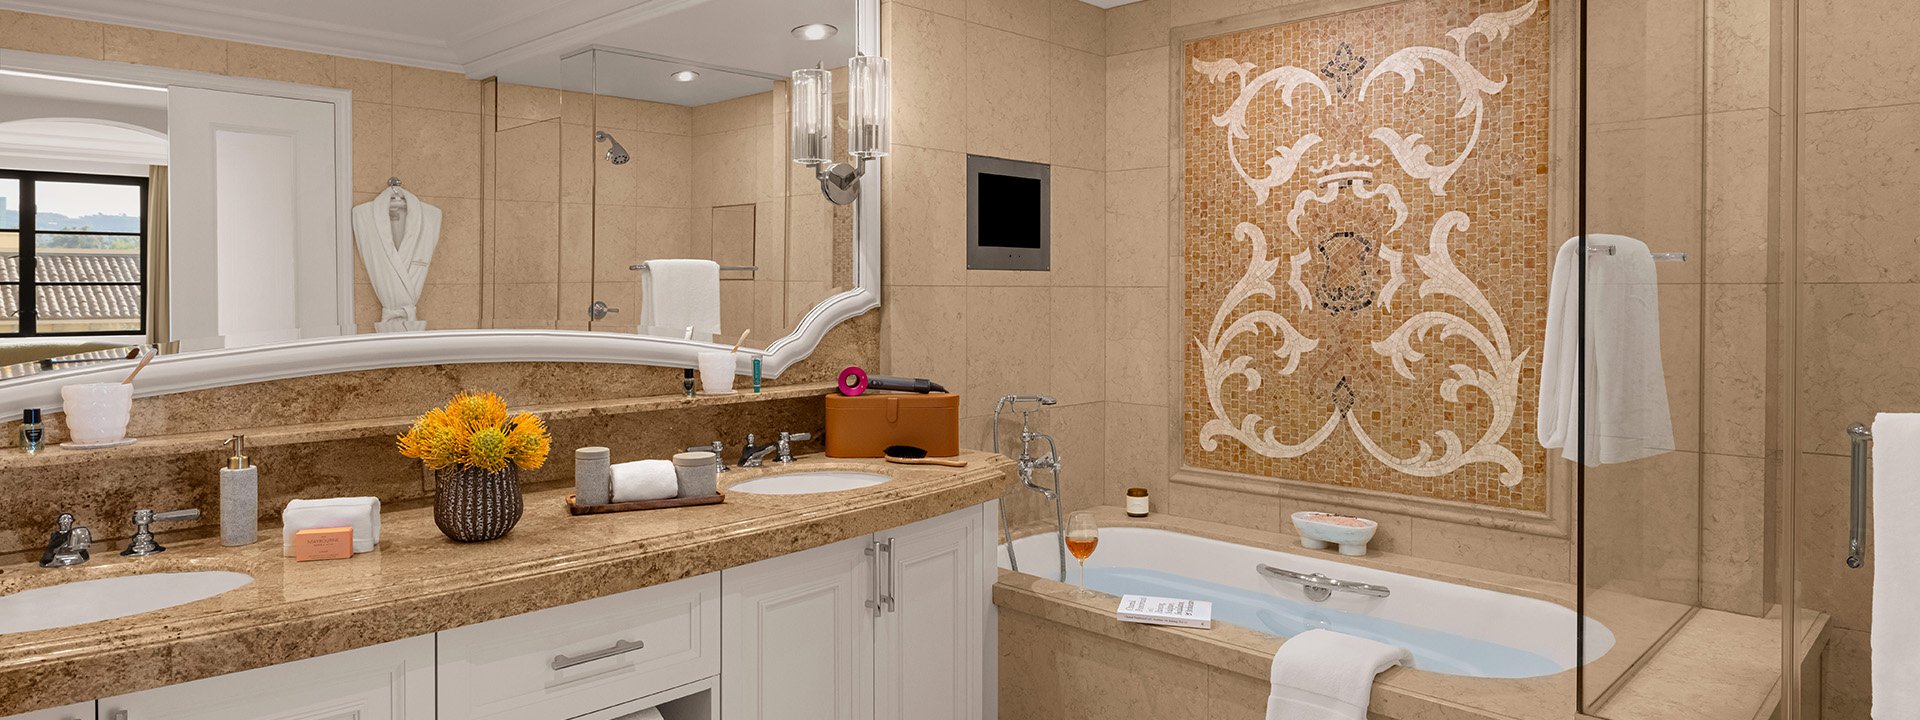 Impeccable bathroom, tub with a delicate towel, emanates effortless sophistication and refined elegance seamlessly.